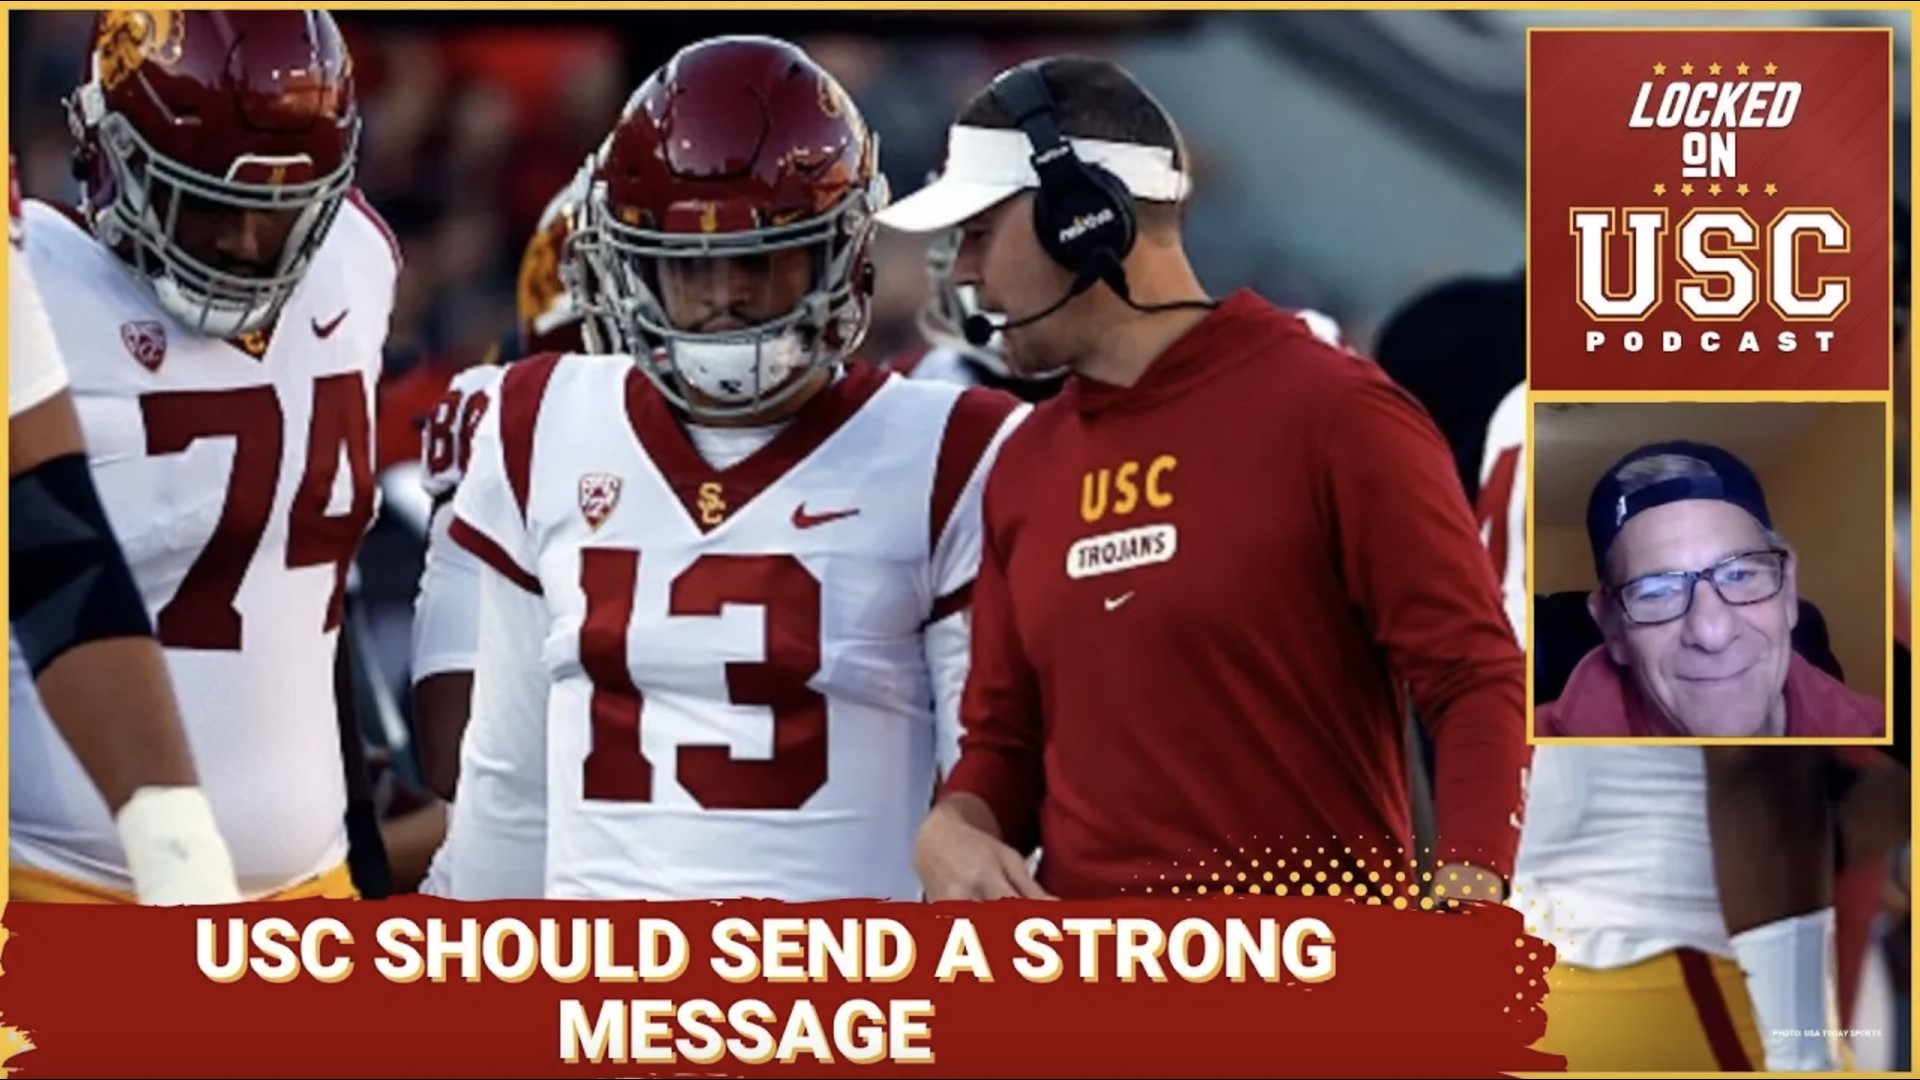 USC's first goal when they go on the road is to get a win and then continue to improve for the next game. Beyond that what happens is up to the players on the field